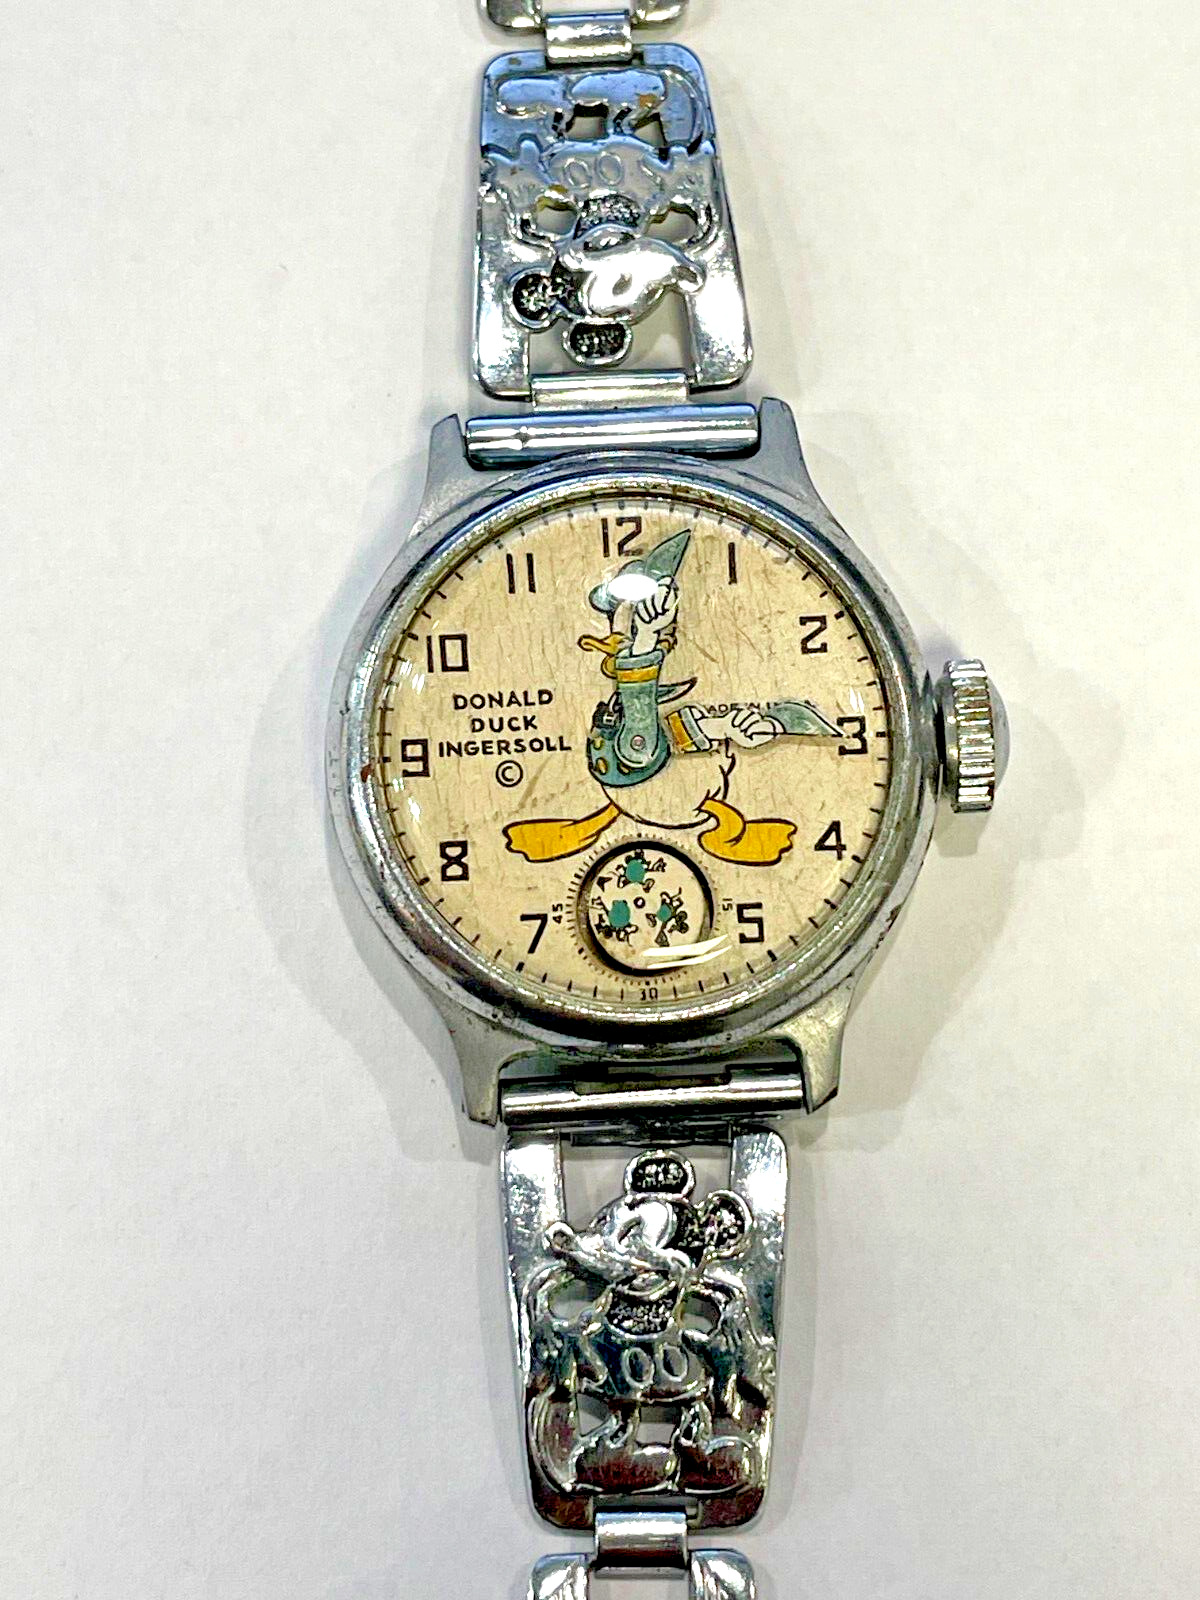 EXTREMELY RARE DONALD DUCK WRIST WATCH WITH BLUE MICKEY SUBDIAL